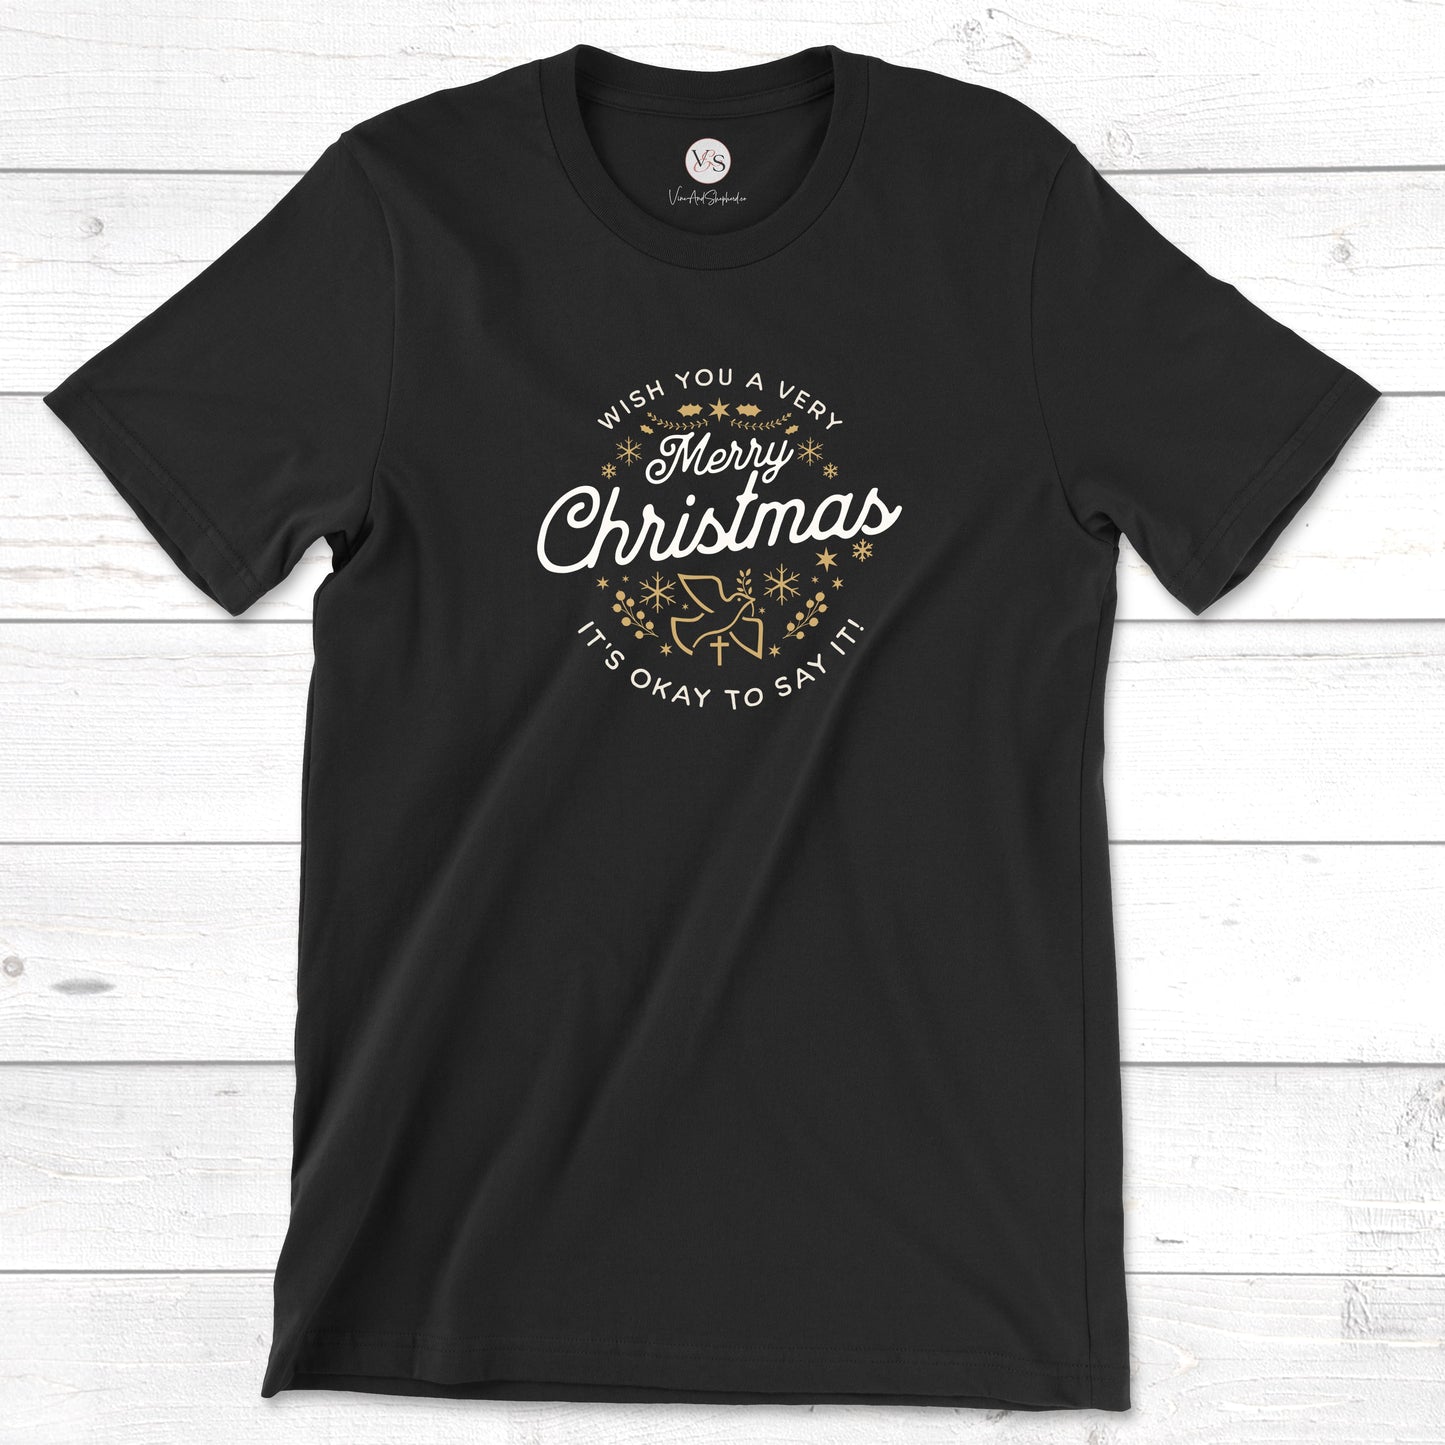 Merry Christmas, It's Okay to Say it! t-shirt in black